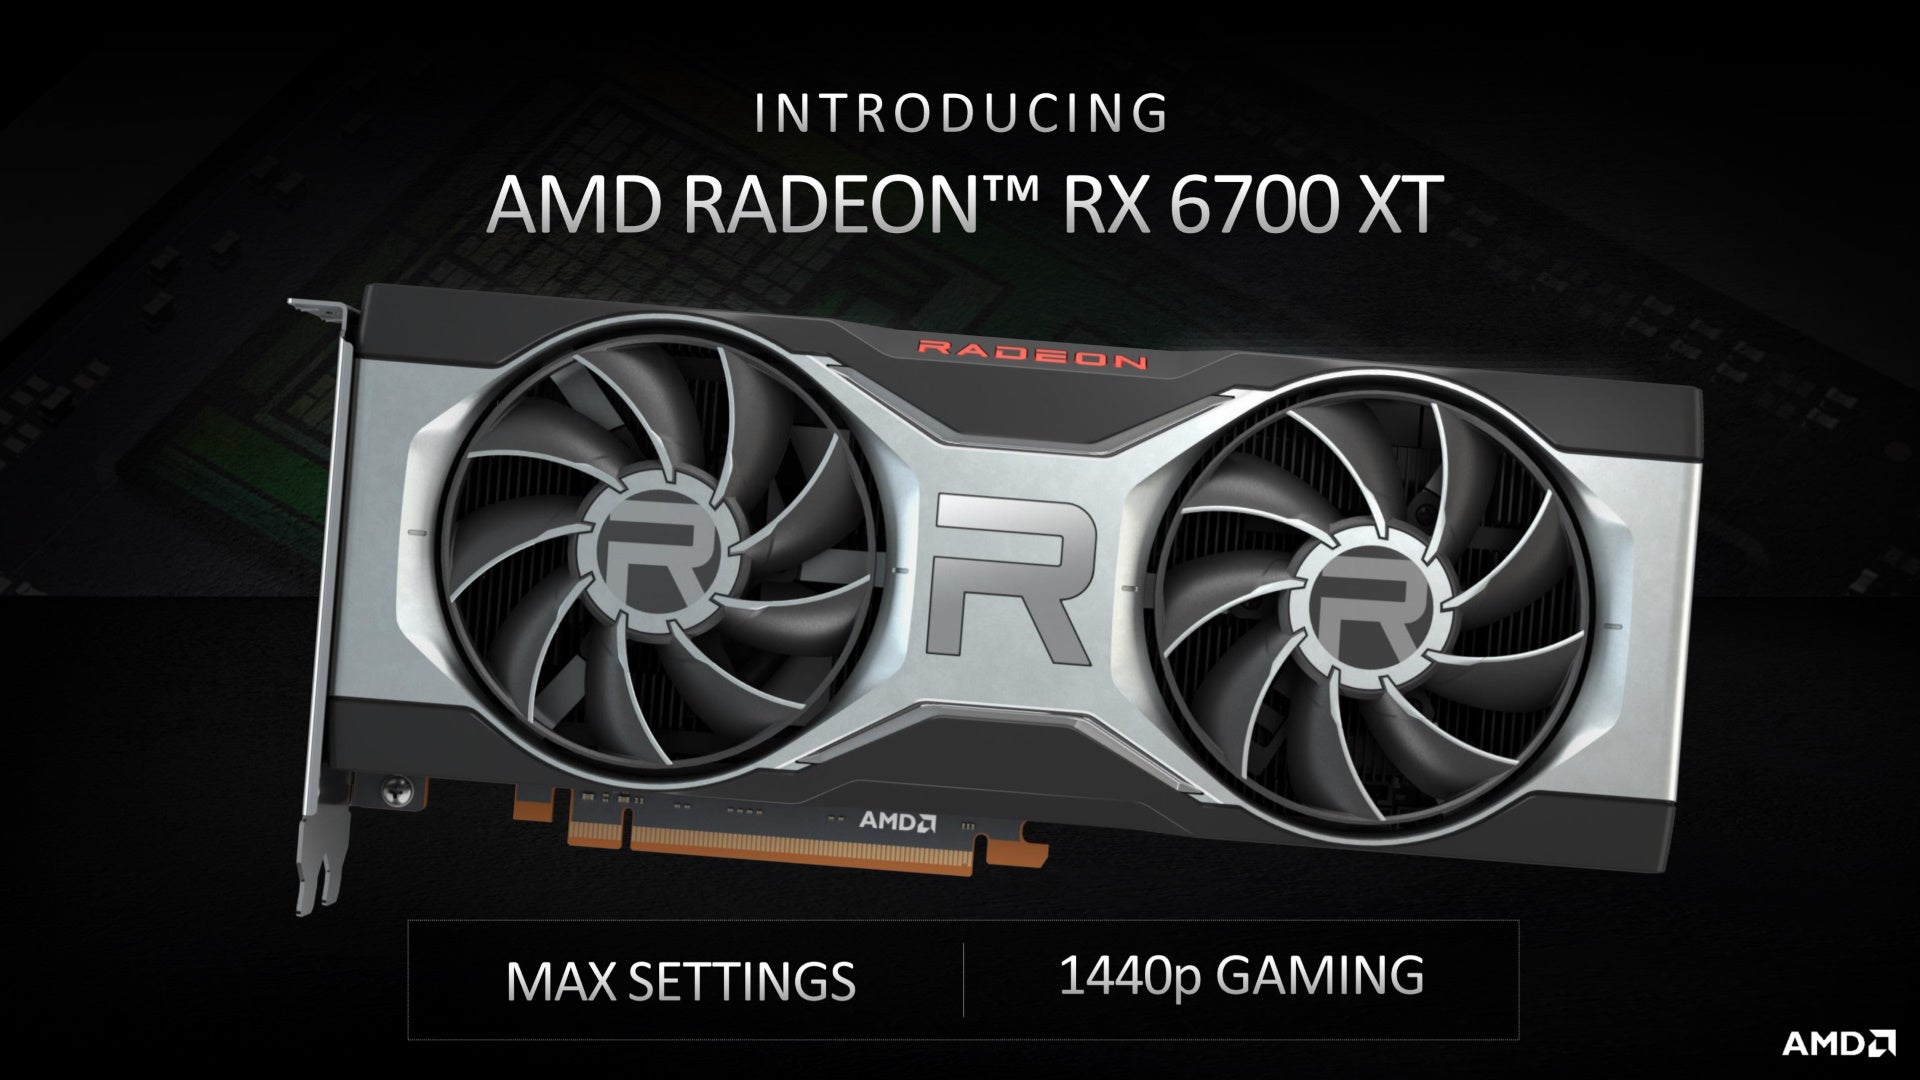 AMD RX 6700 XT: everything you need to know about AMD's new GPU